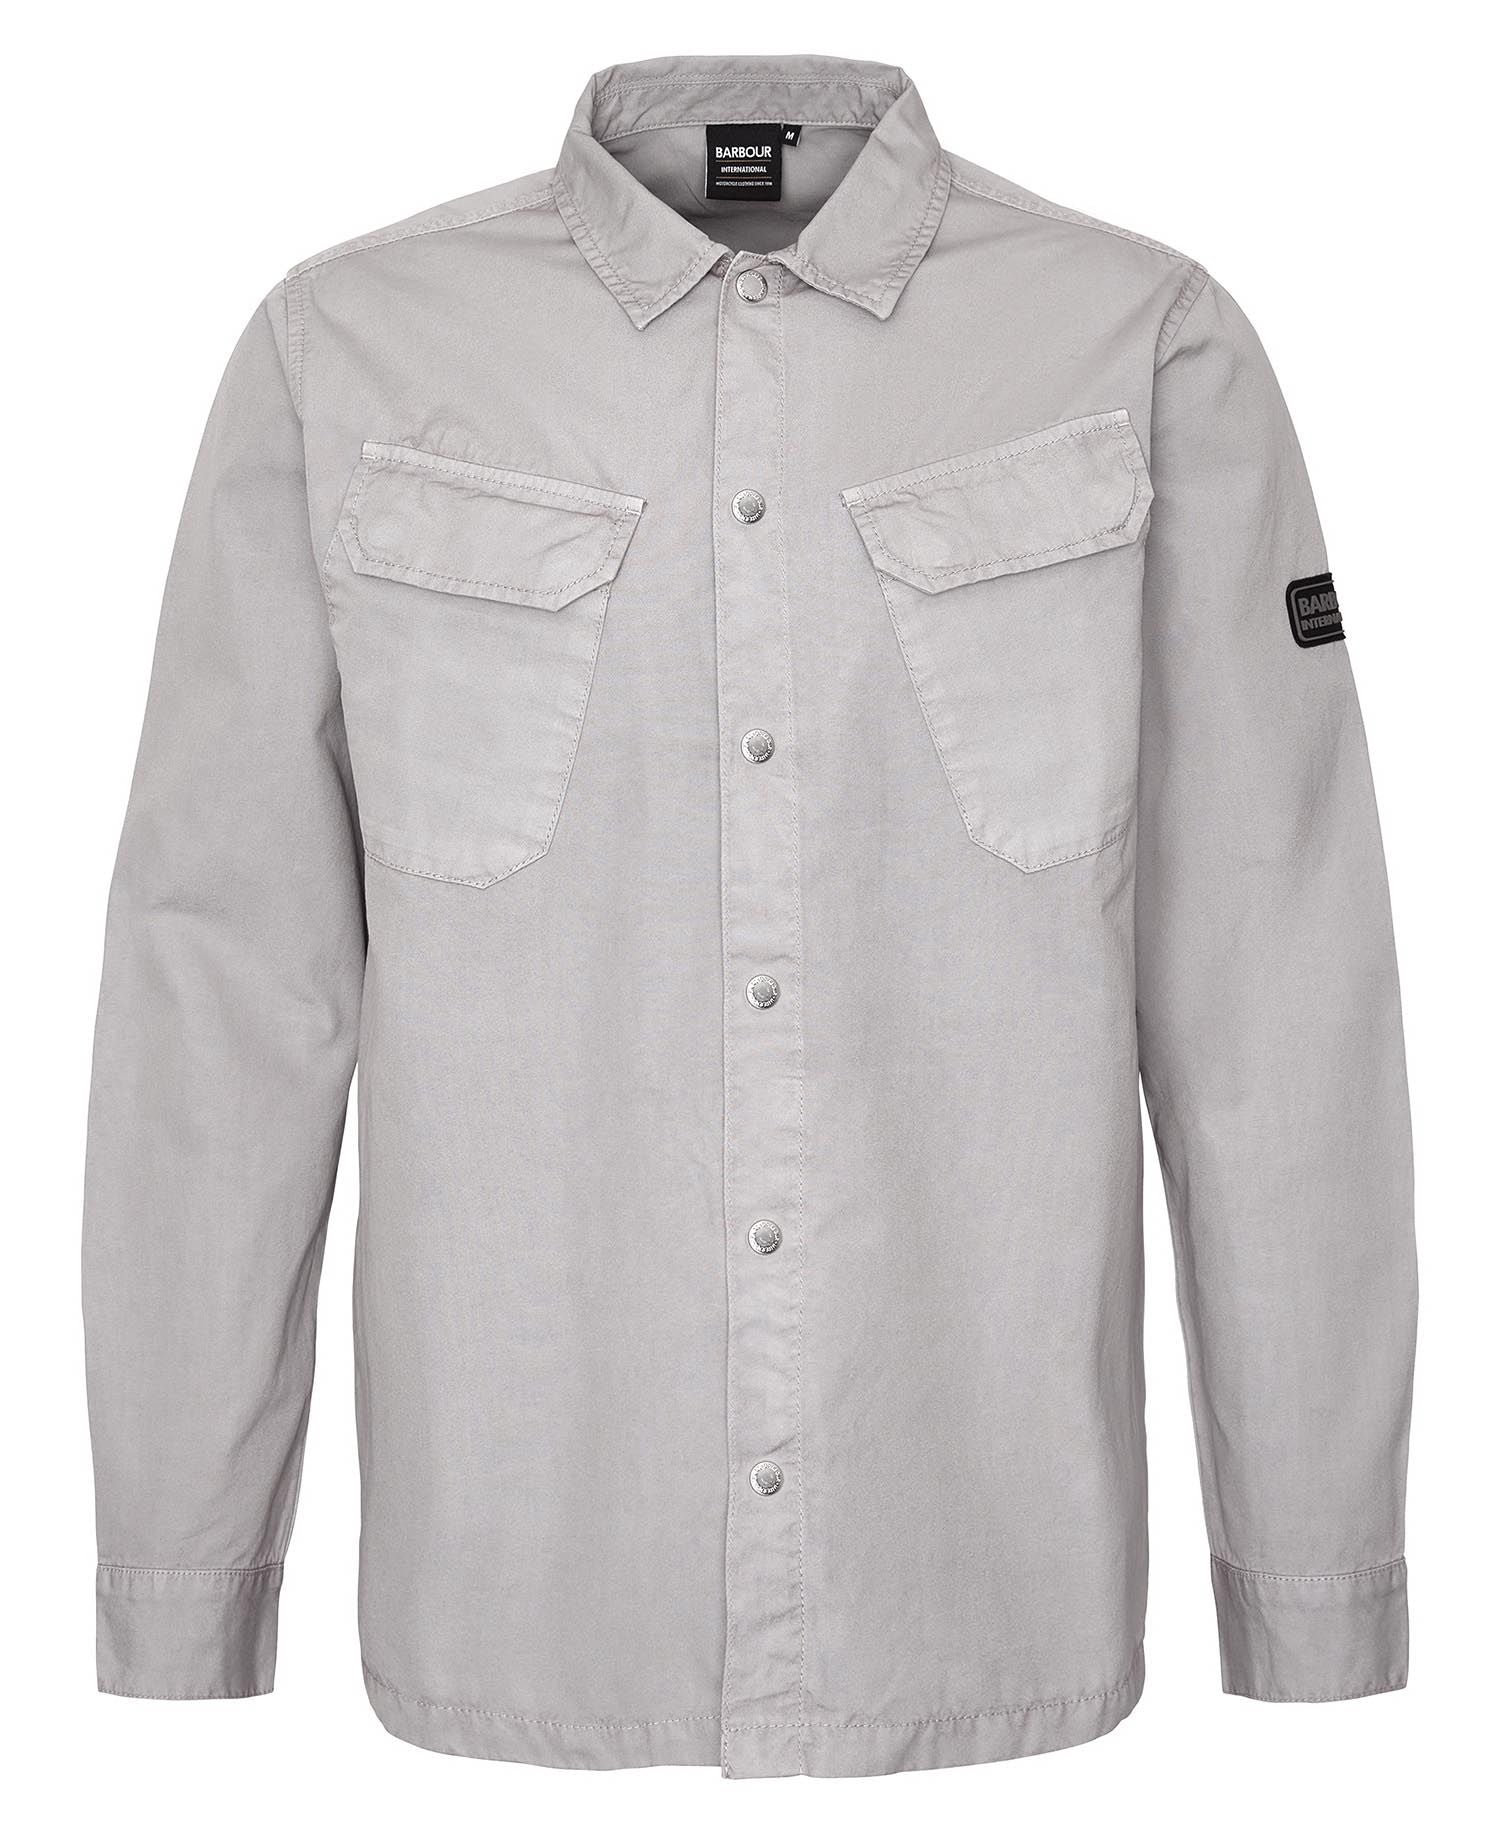 Barbour International Gear Overshirt – Clues & Cloud8 Clothing Store